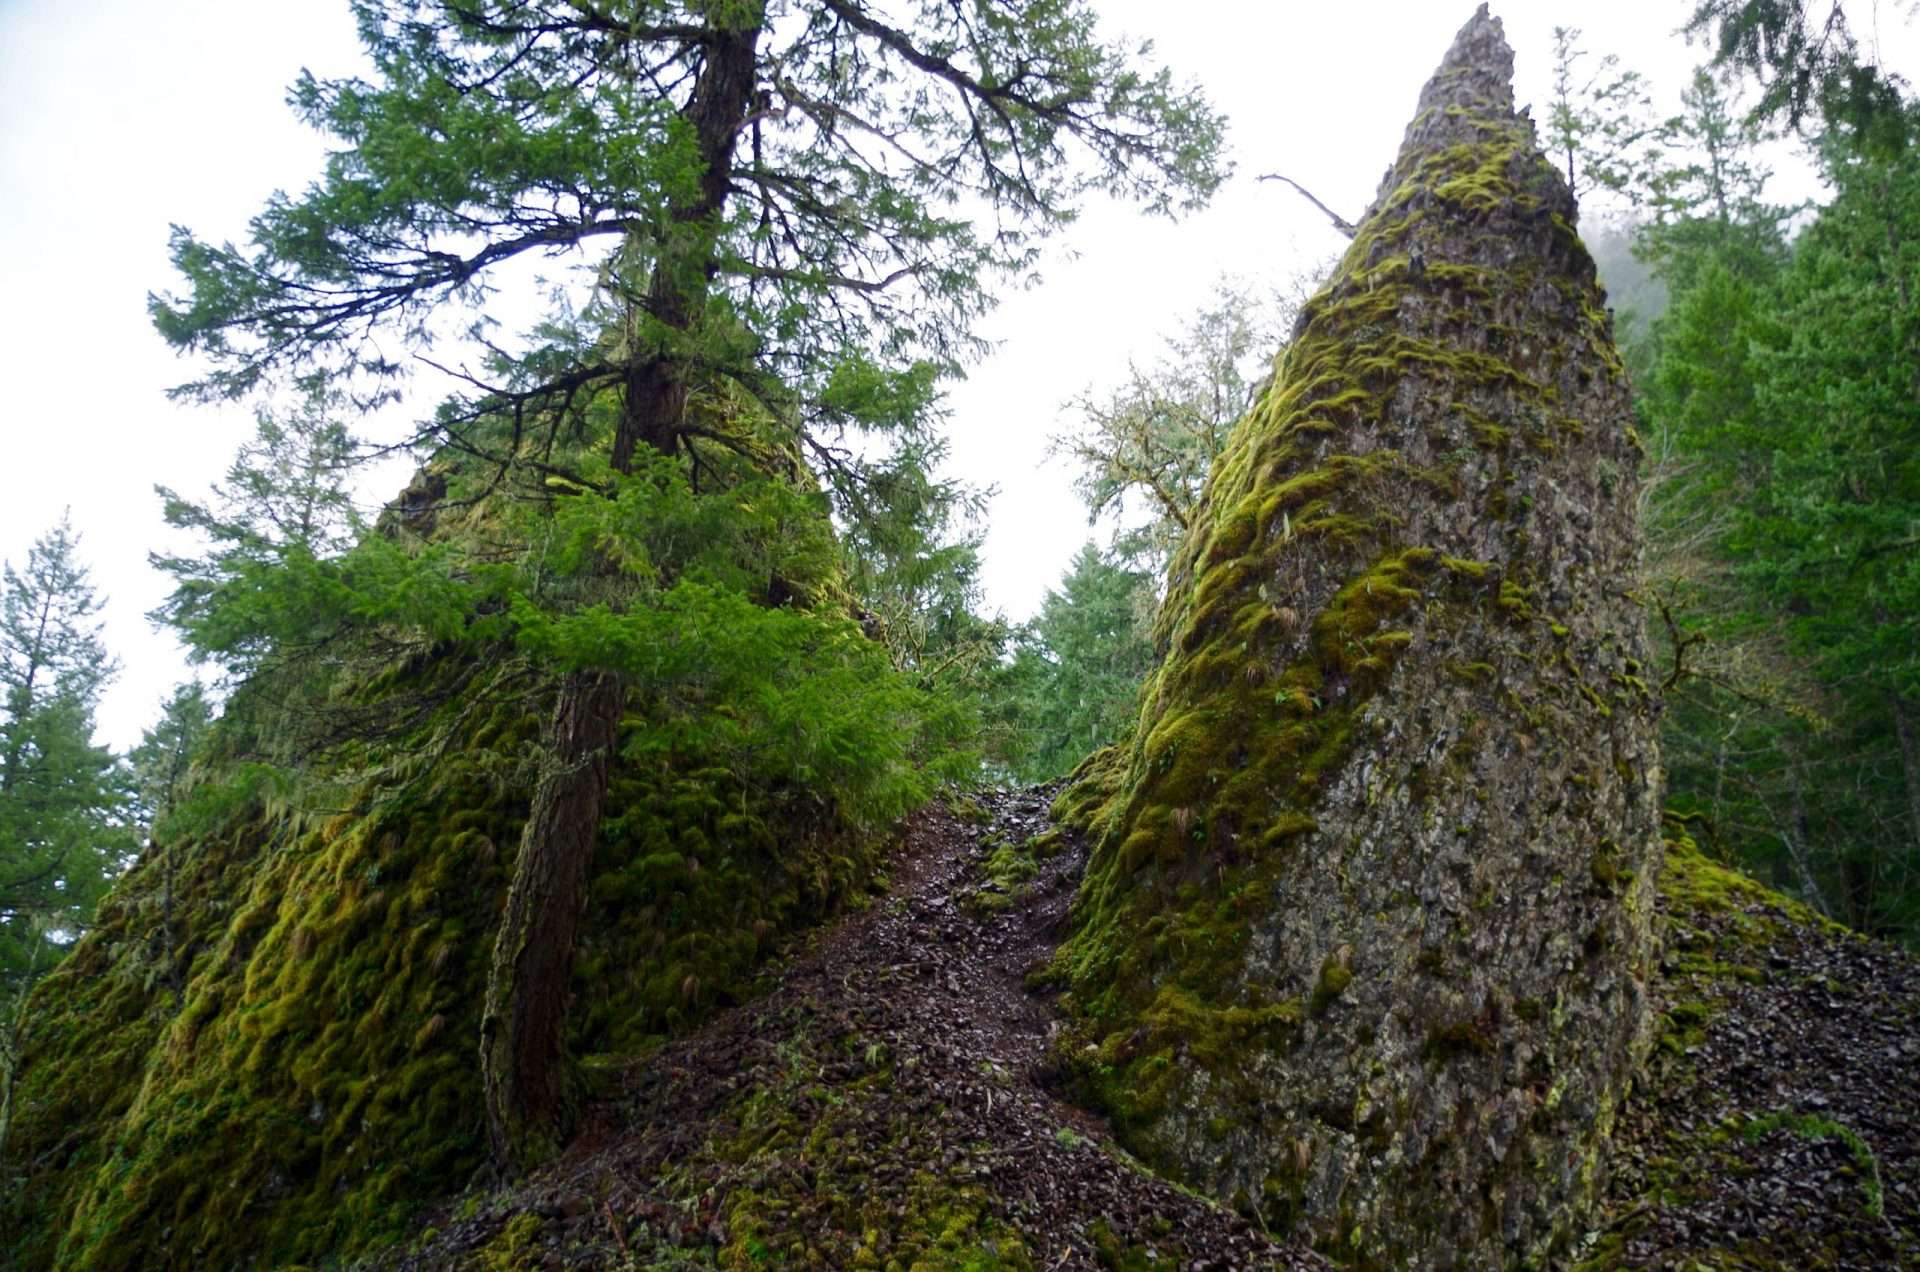 Two pointed basalt pinnacles, one of them partially obscured by a tree.